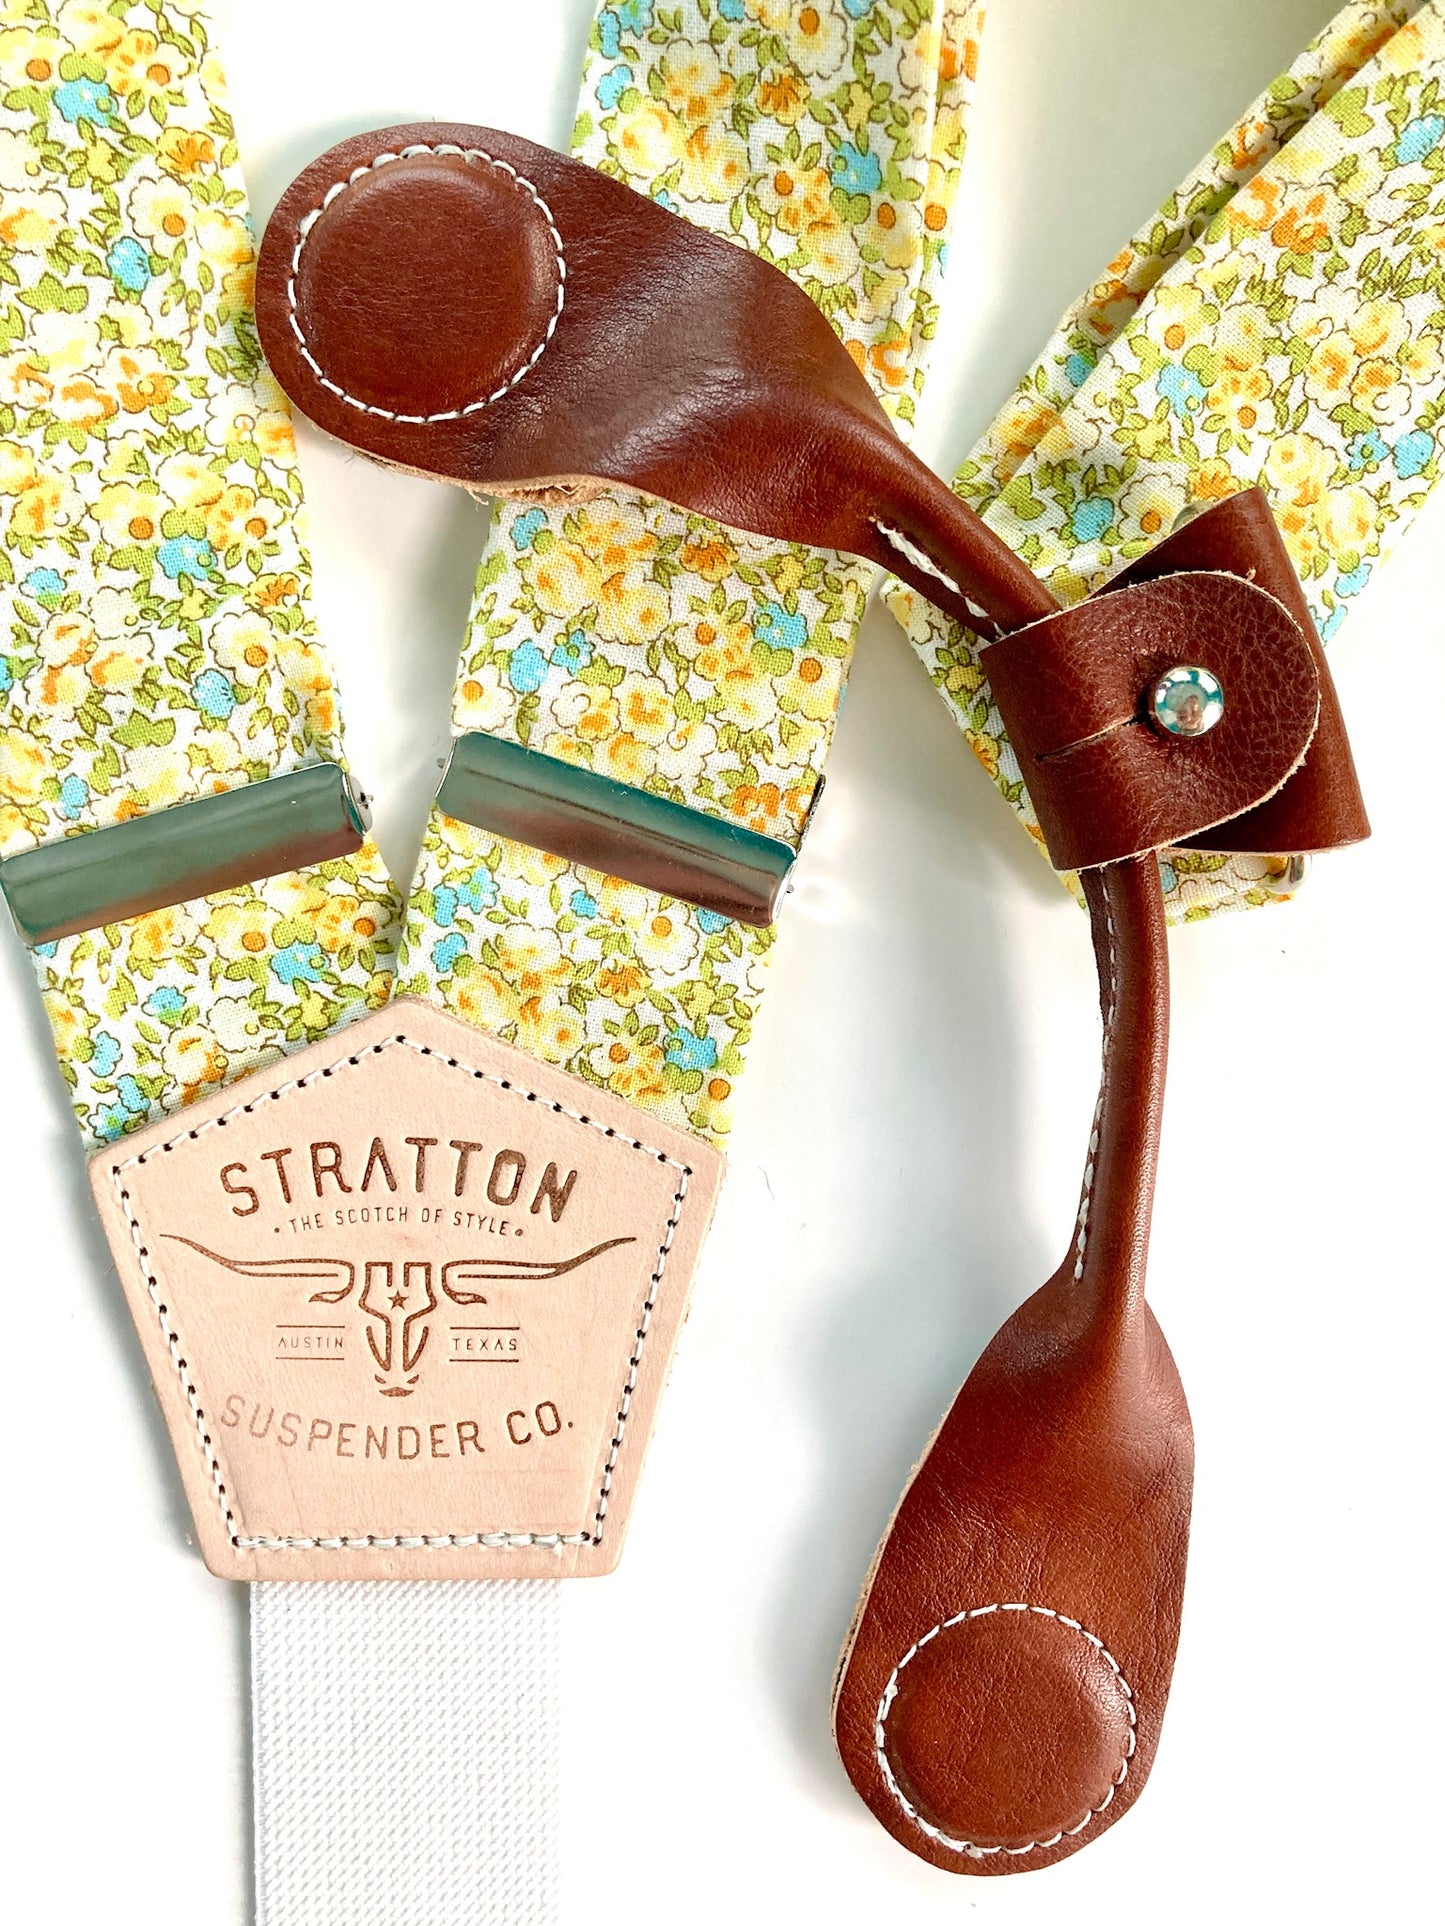 Stratton Suspenders in Summertime Yellow Floral Paired with Cognac Pontedero Leather Magnetic Clasps